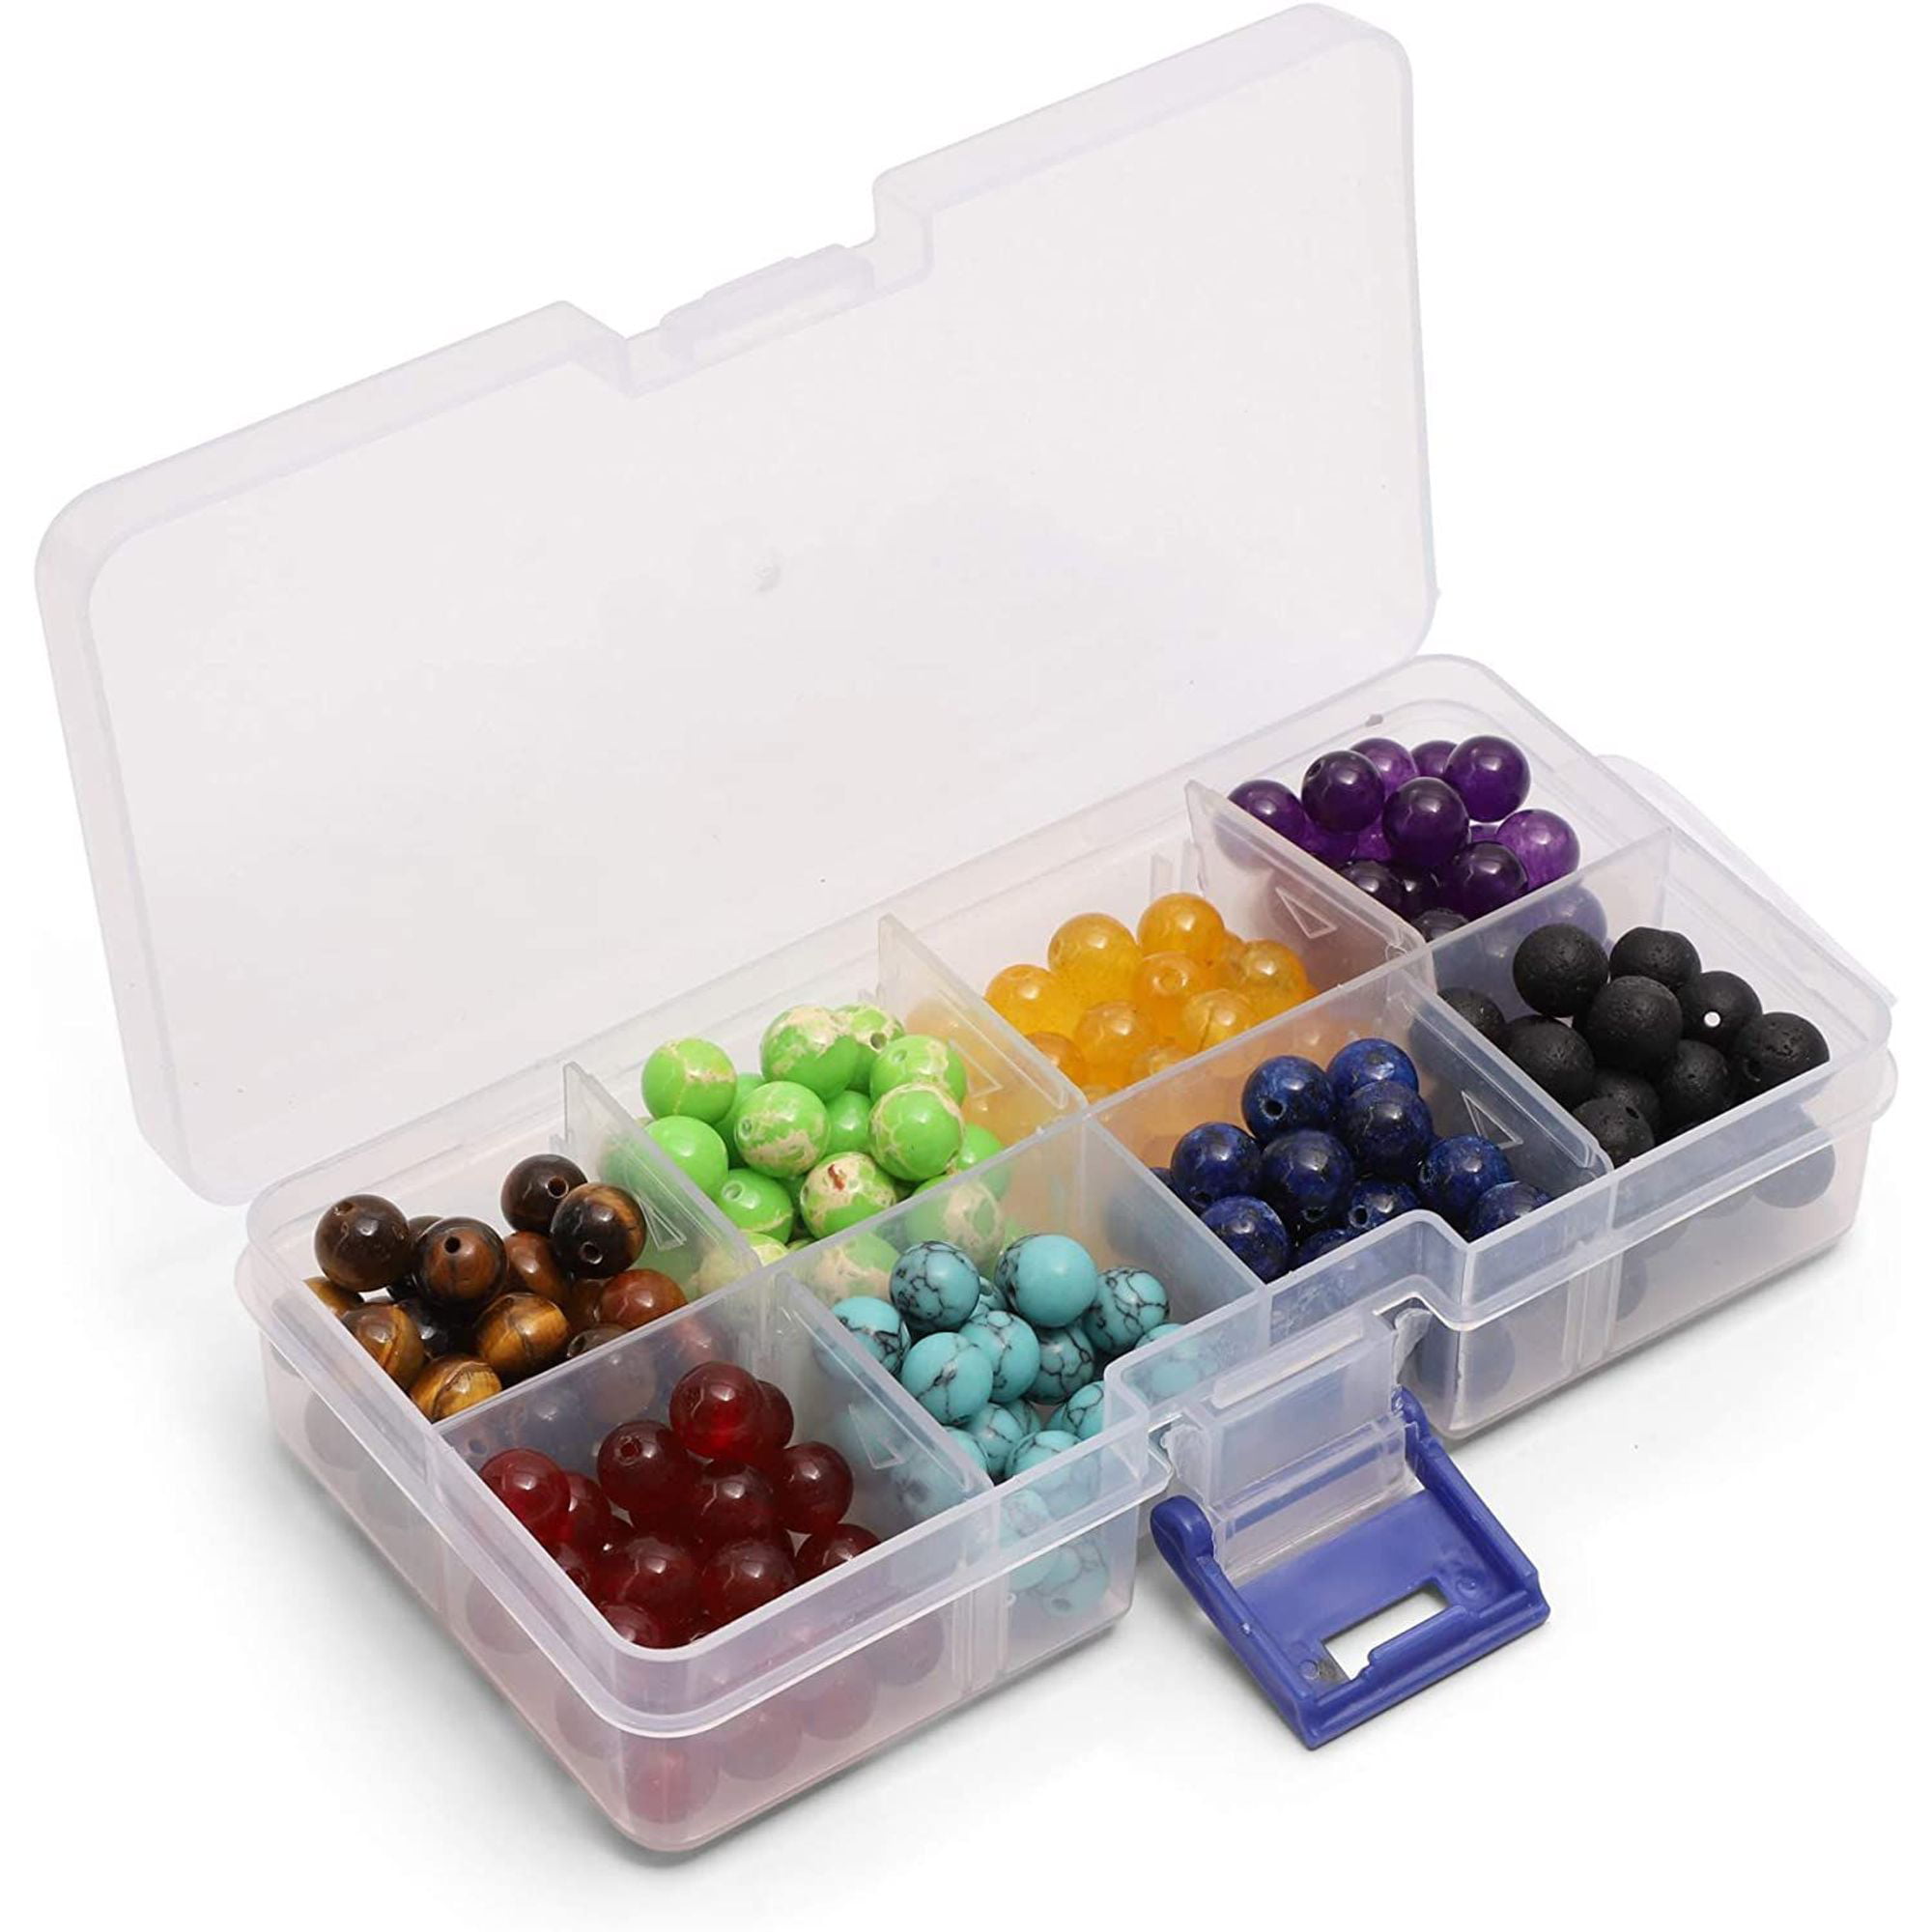 224 Packs Chakra Bead Gemstone Kit for Jewelry Making Necklaces ...